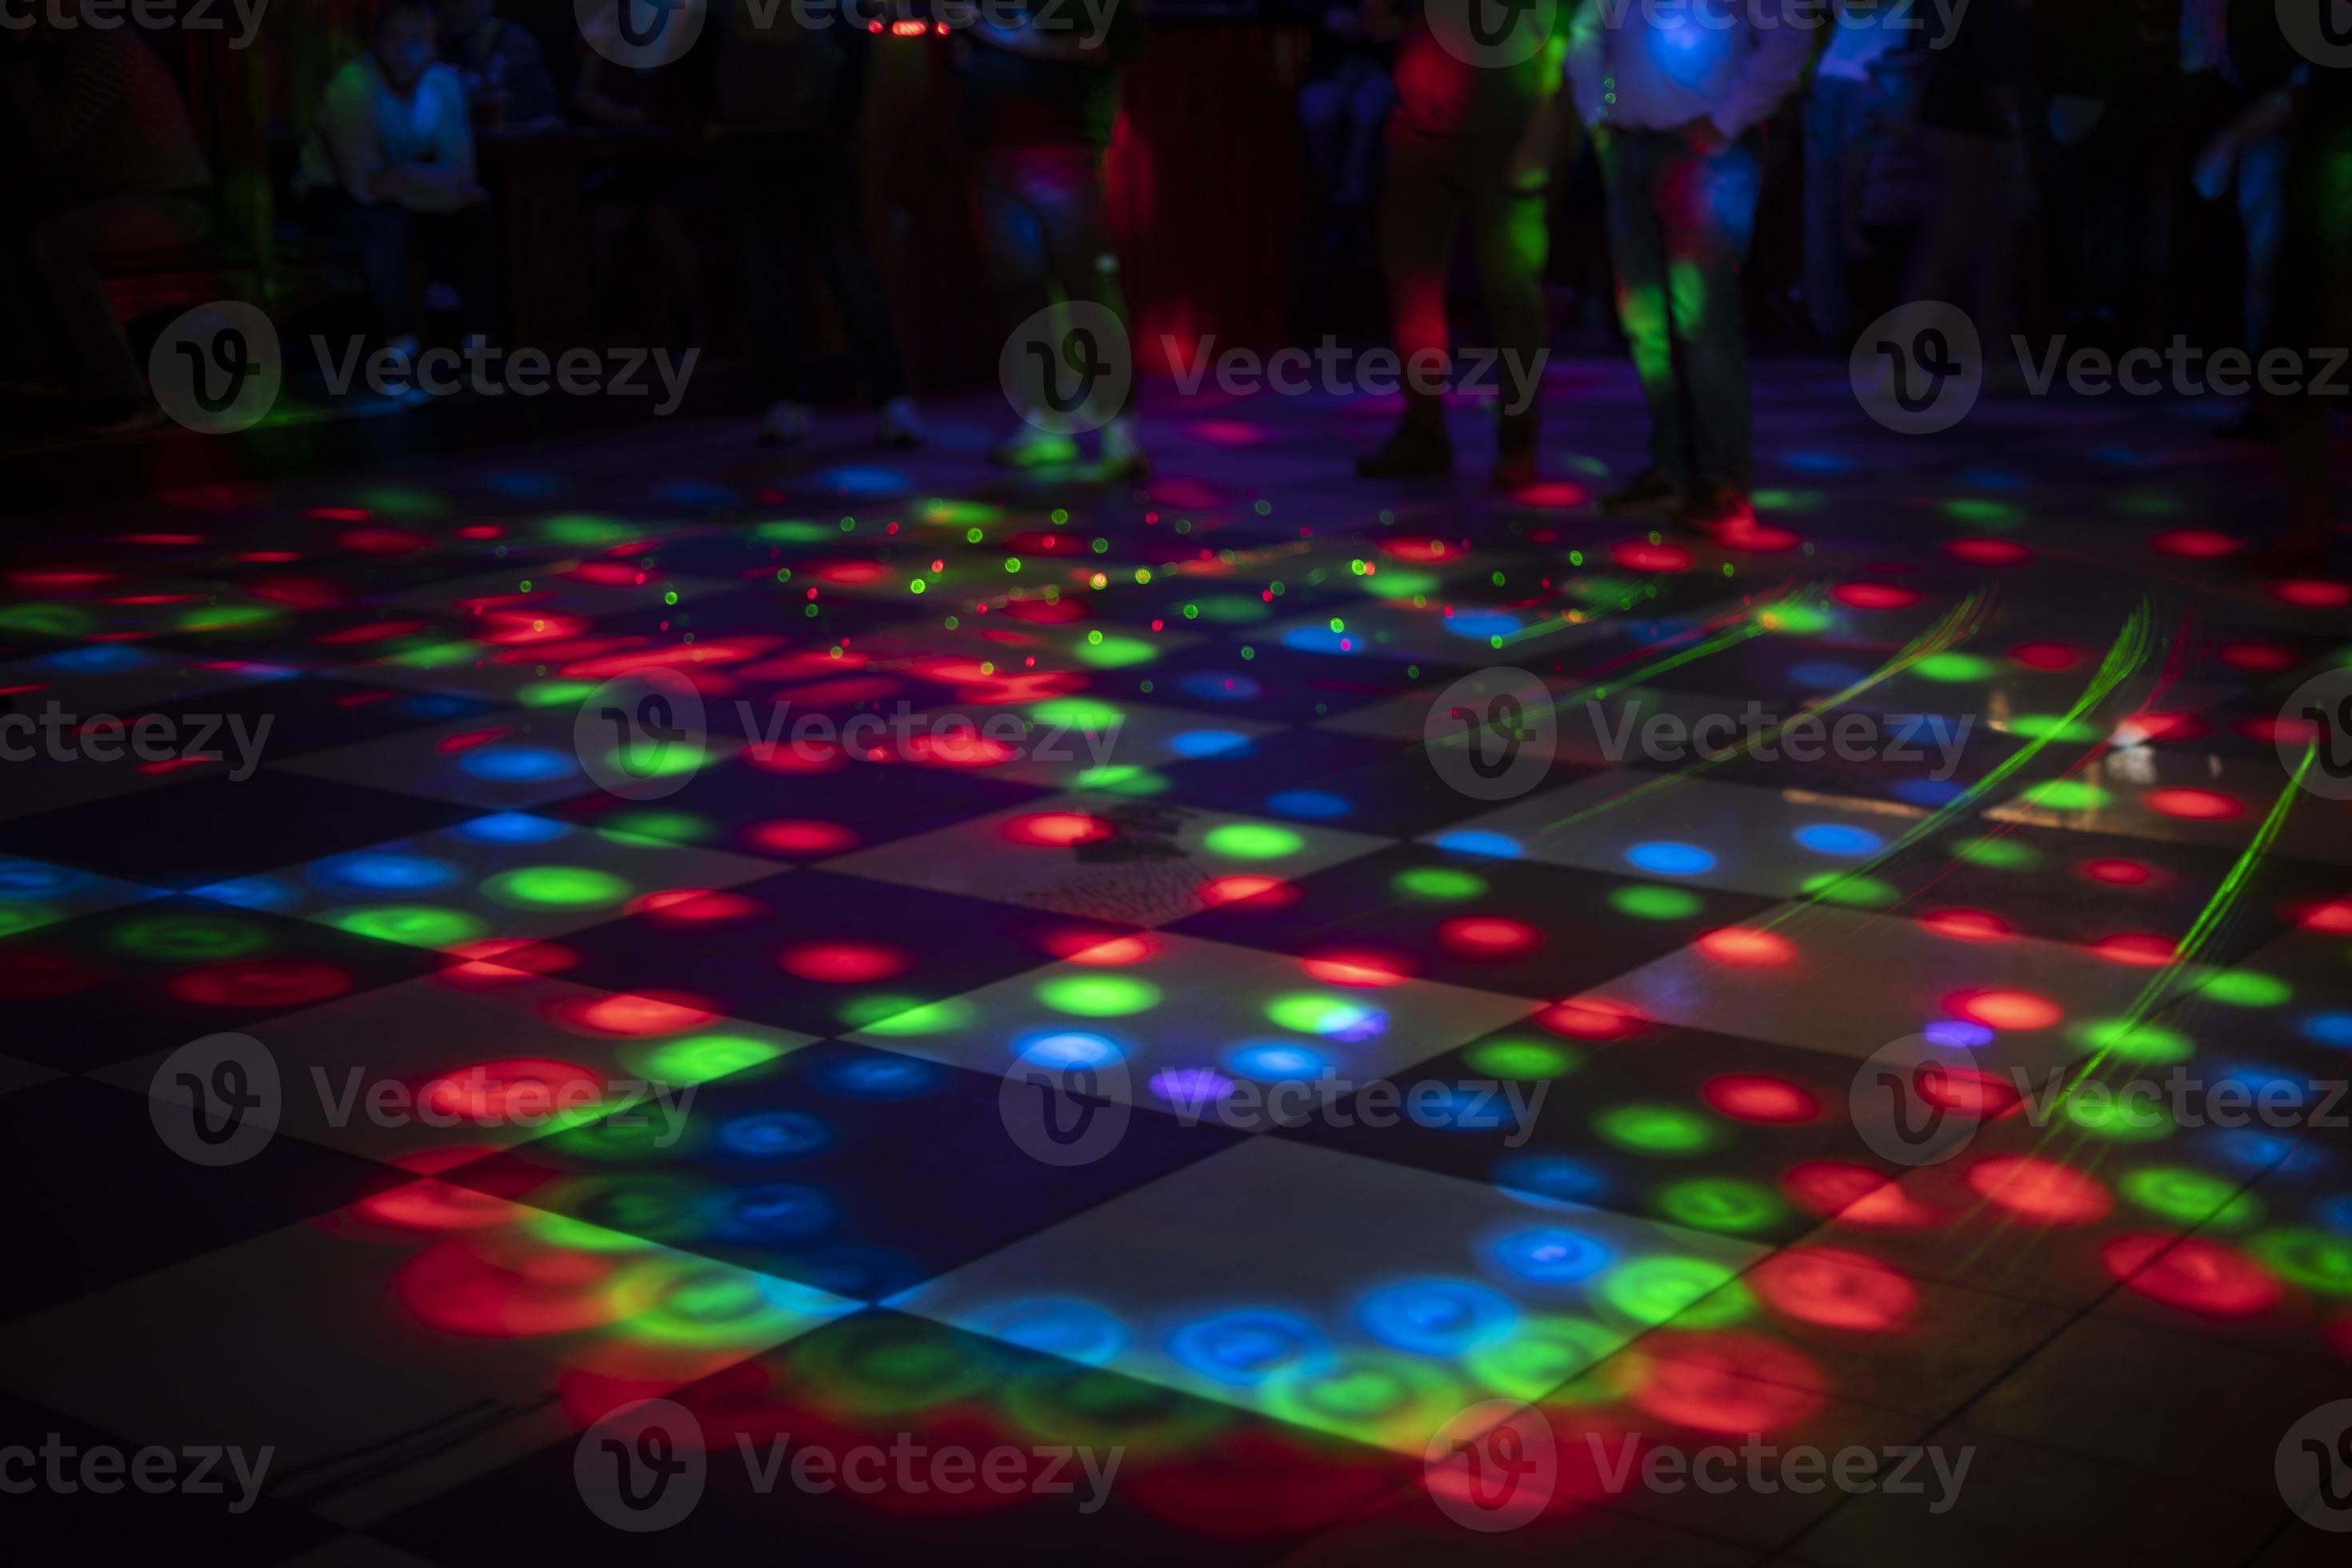 https://static.vecteezy.com/system/resources/previews/016/786/102/large_2x/disco-on-dance-floor-flower-spots-on-floor-color-music-indoors-photo.jpg